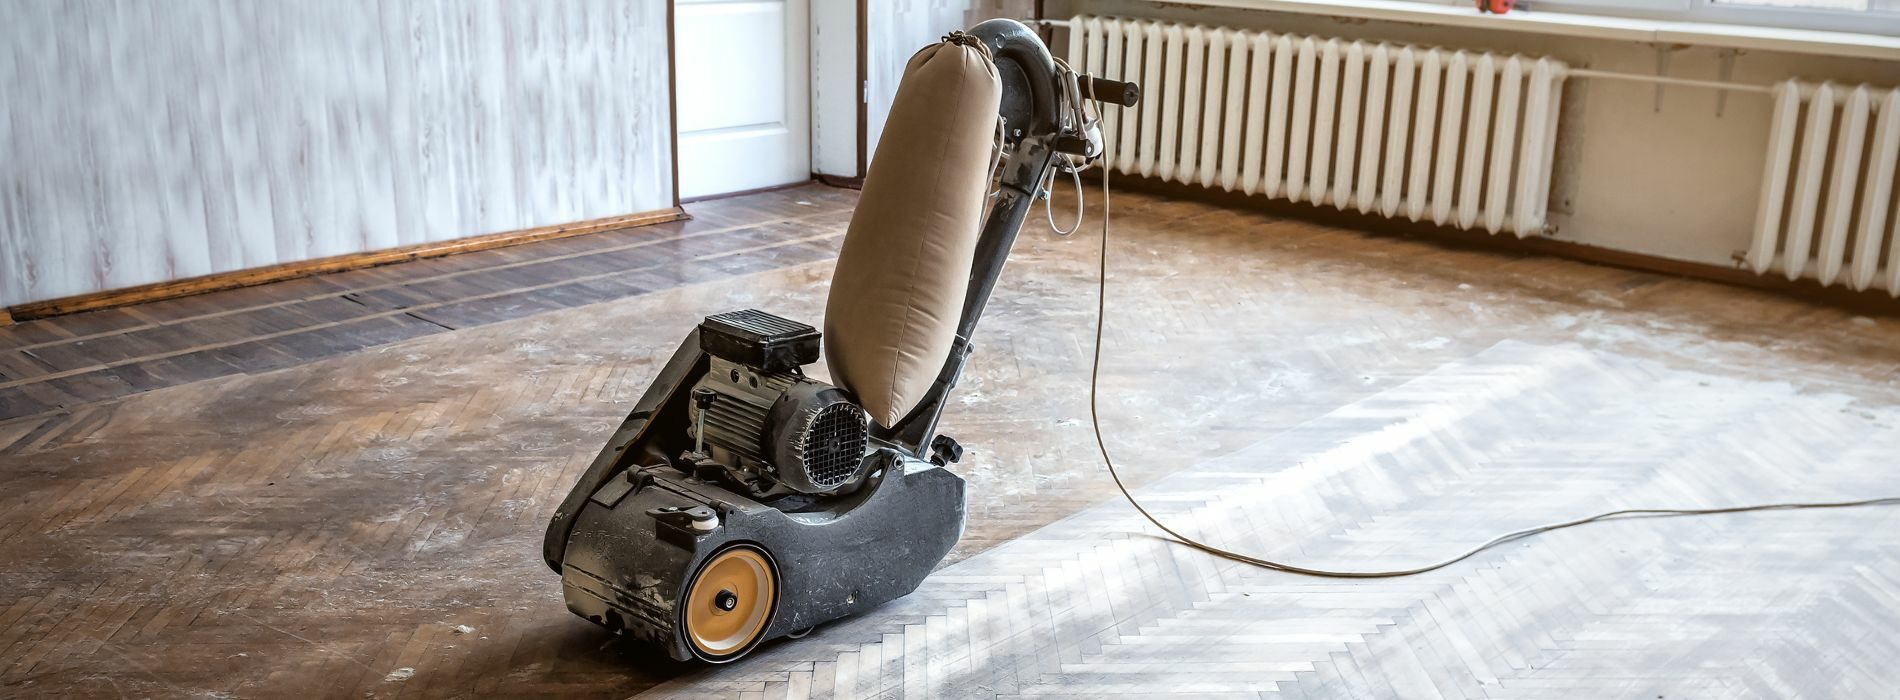 Bona Scorpion drum sander with dust extraction system, ideal for floor sanding in Highgate, N6. Powerful 1.5kW motor, 240V/50Hz operation. HEPA-filtered dust extraction ensures clean and efficient sanding of hardwood floors.